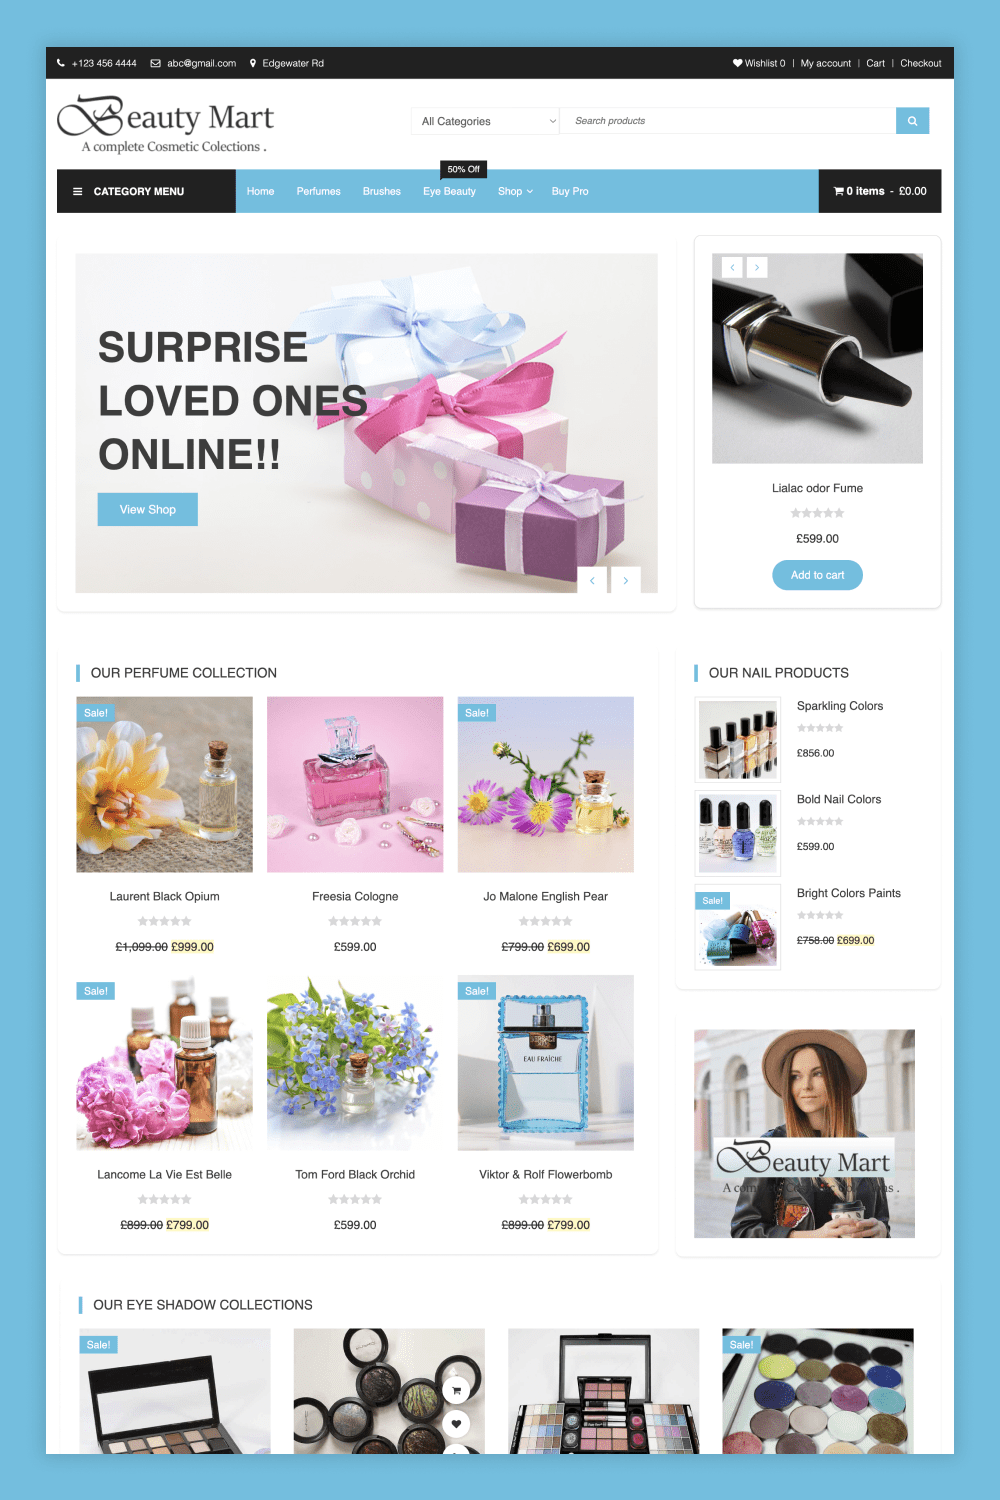 Perfume shop landing page screenshot with slider and products.